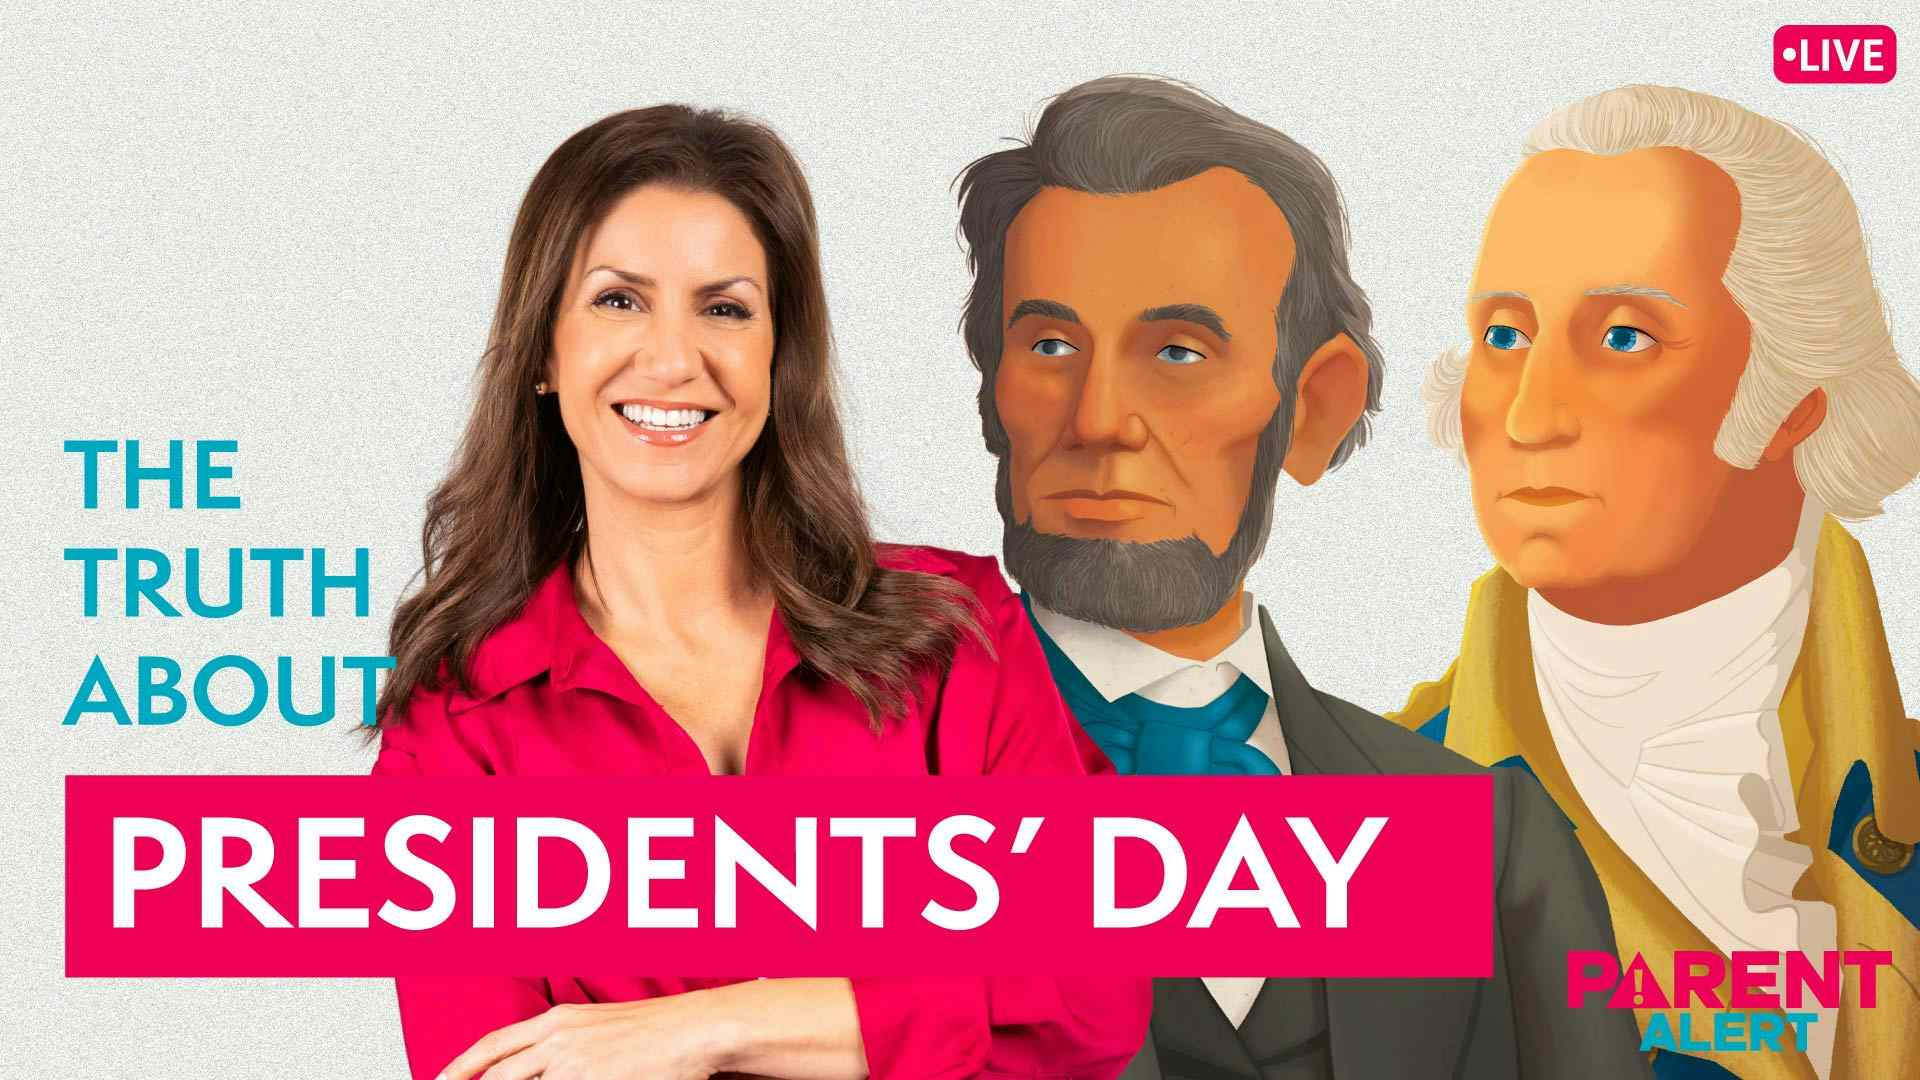 Parent Alert: The Truth about Presidents' Day